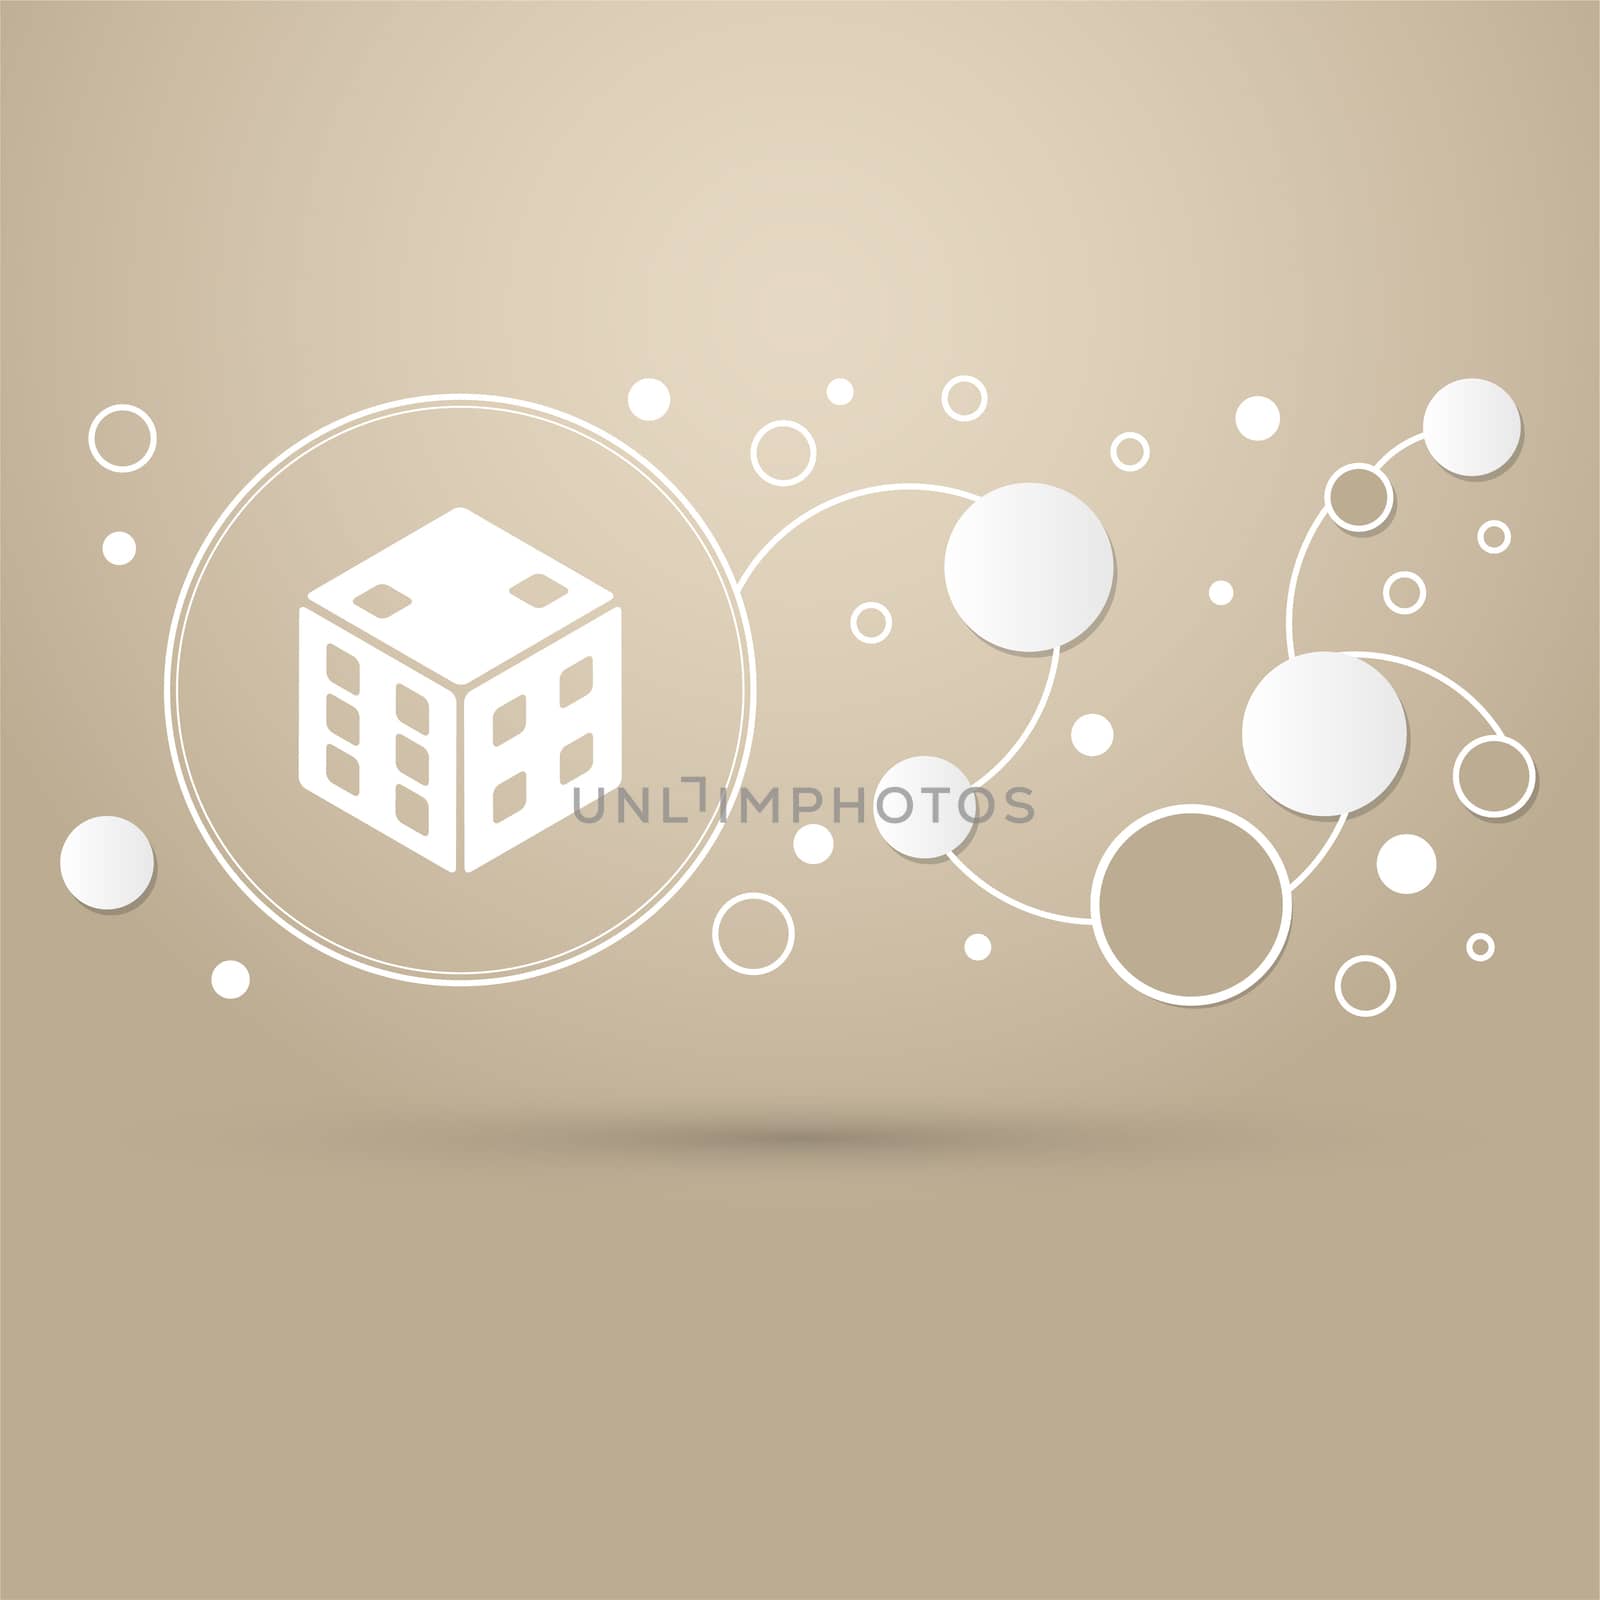 game cube icon on a brown background with elegant style and modern design infographic. illustration